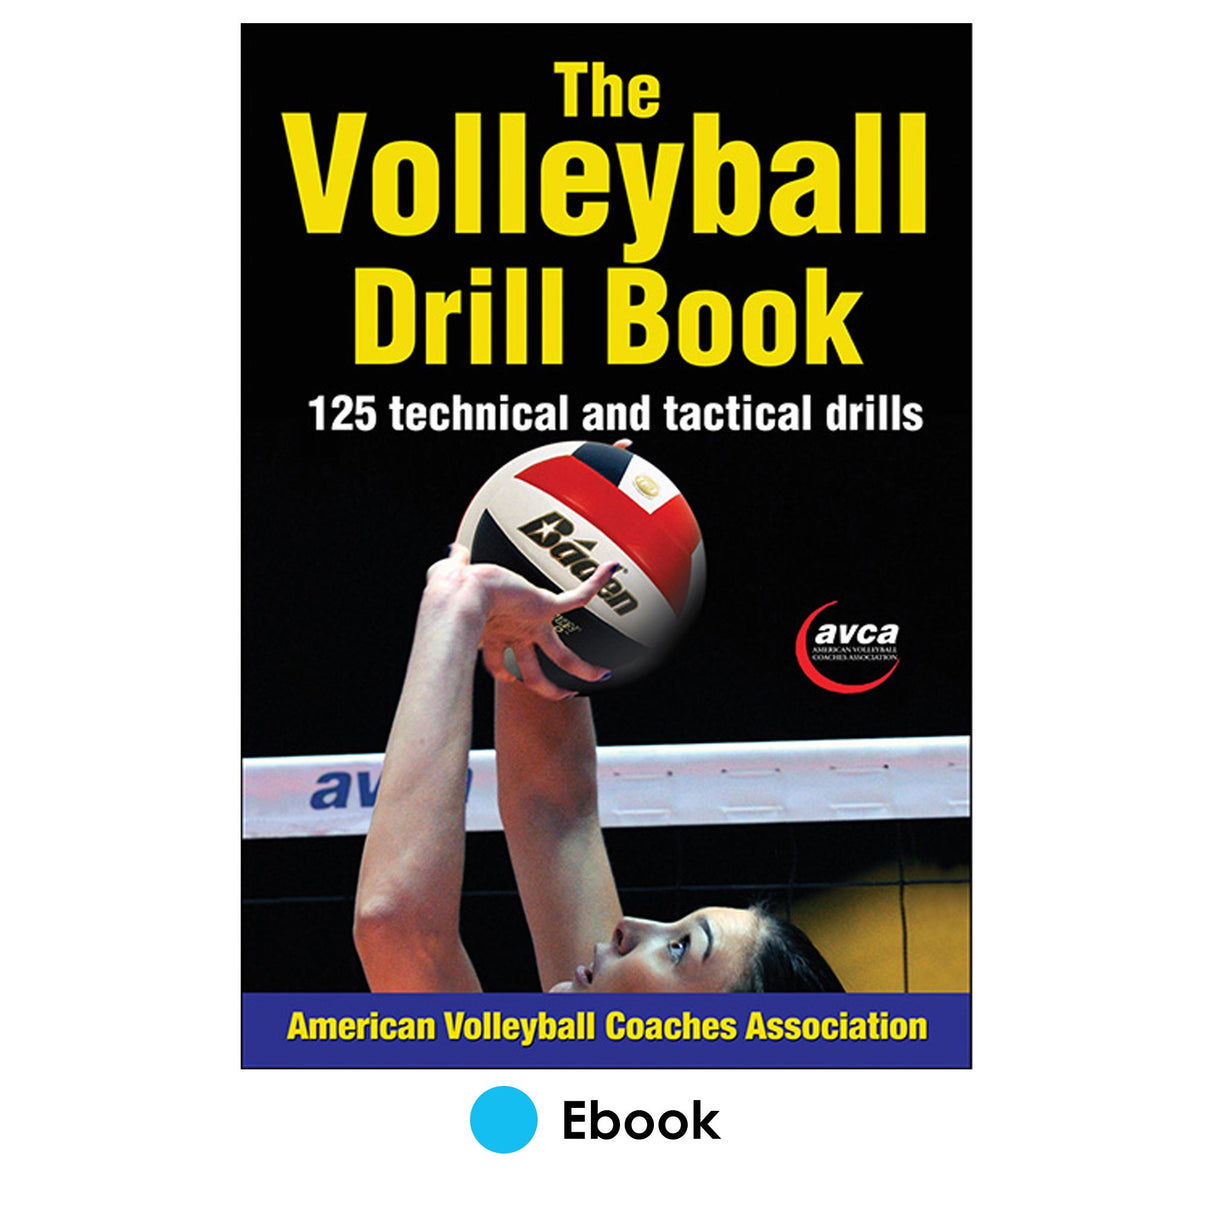 Volleyball Drill Book PDF, The